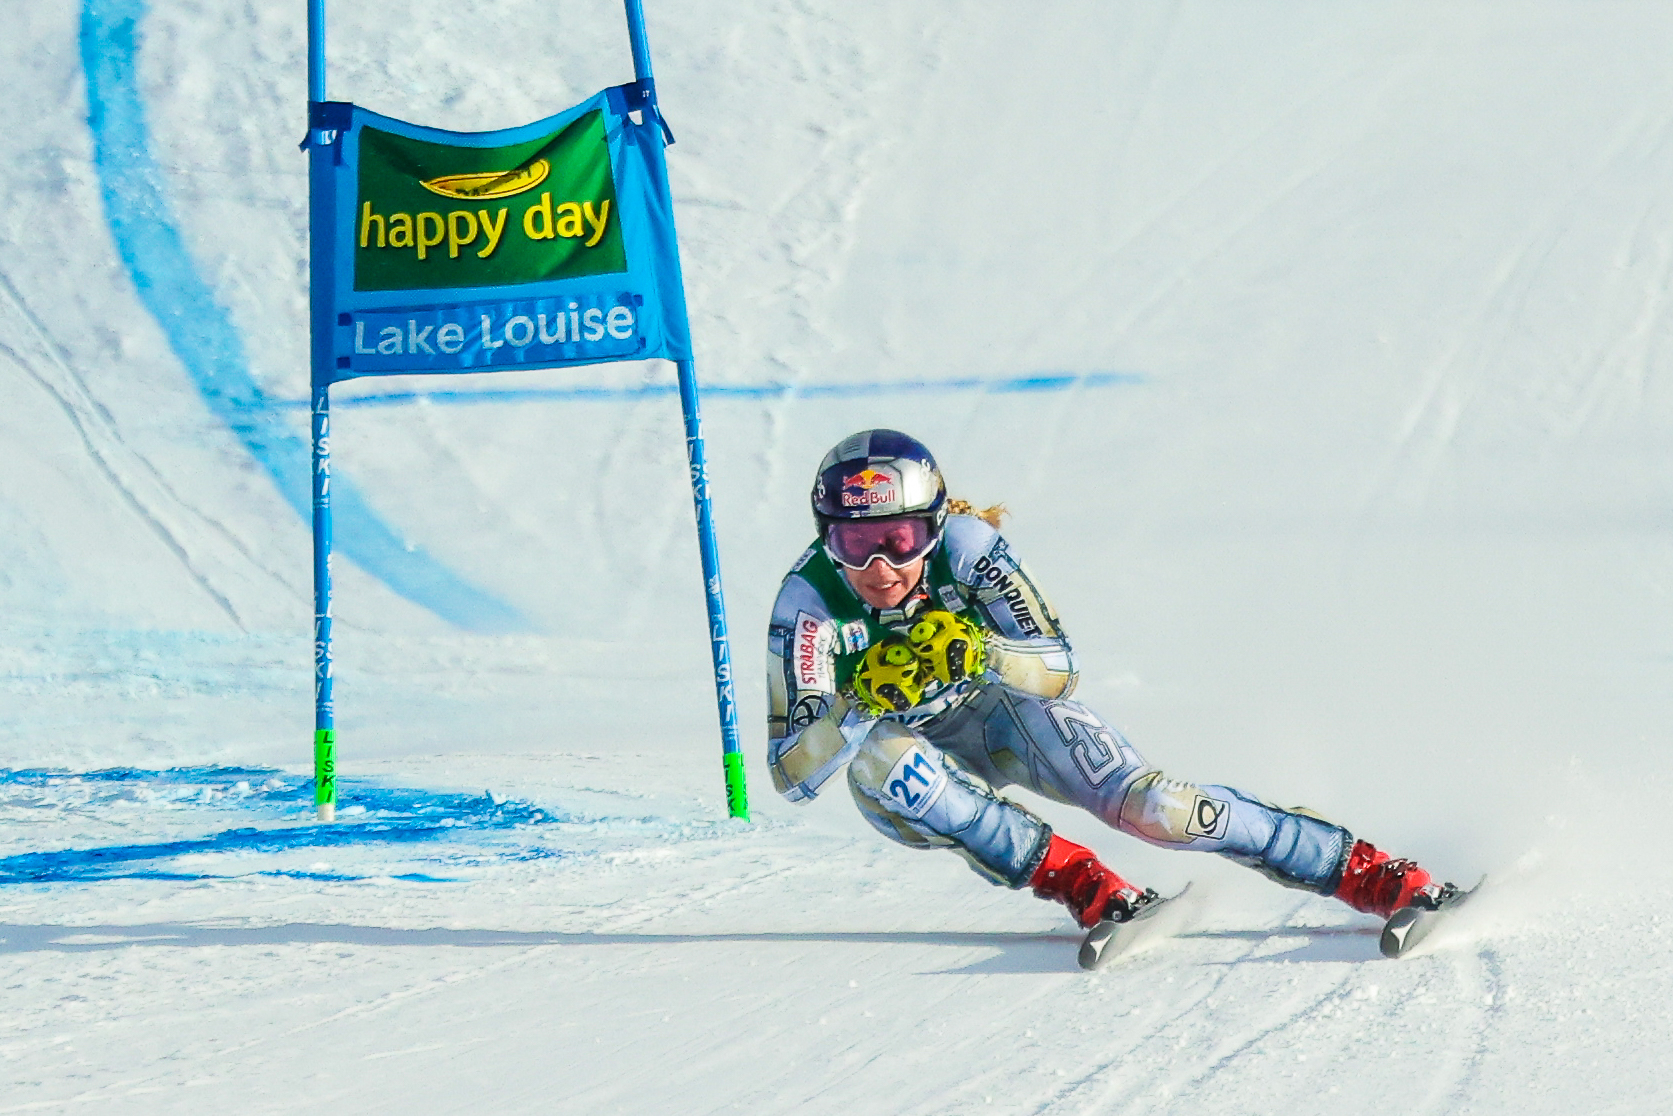 Dec 5, 2021; Lake Louise, Alberta, CAN; Ester LEdecka of Czech Republic competes during women's Super G race at the Lake Louise Audi FIS alpine skiing World Cup at Lake Louise. Mandatory Credit: Sergei Belski-USA TODAY Sports